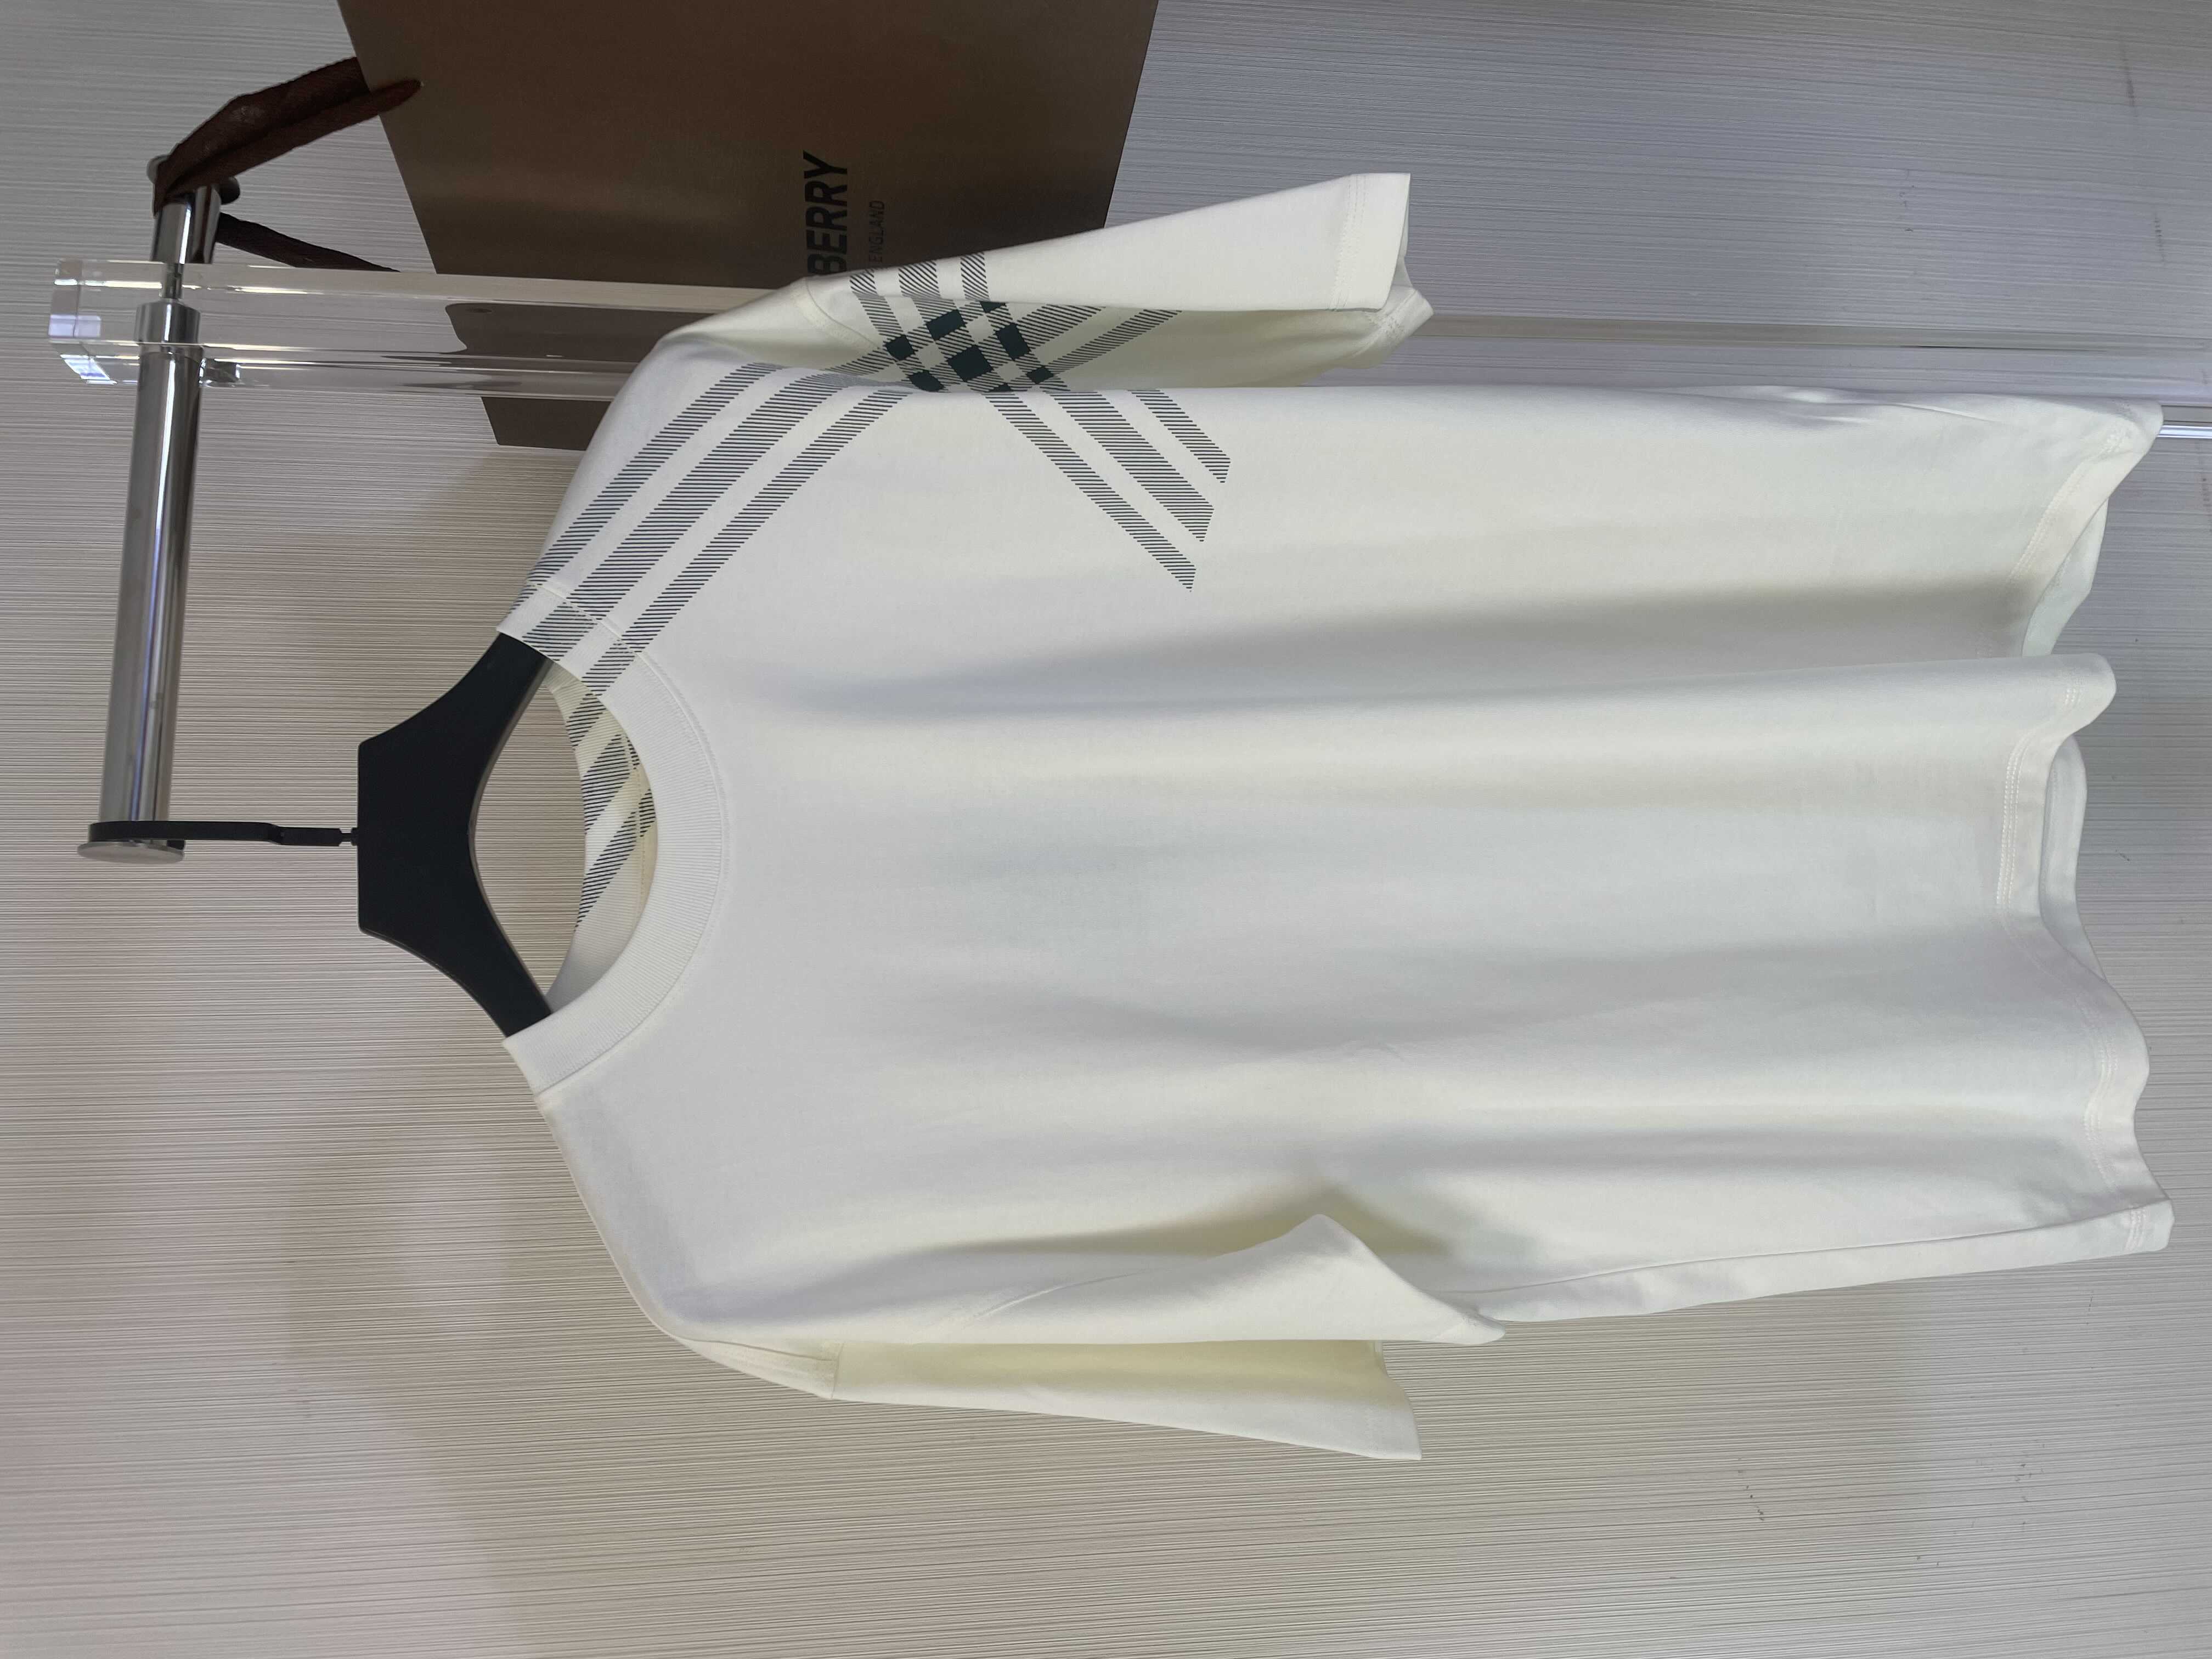 Burberry Clothing T-Shirt Printing Combed Cotton